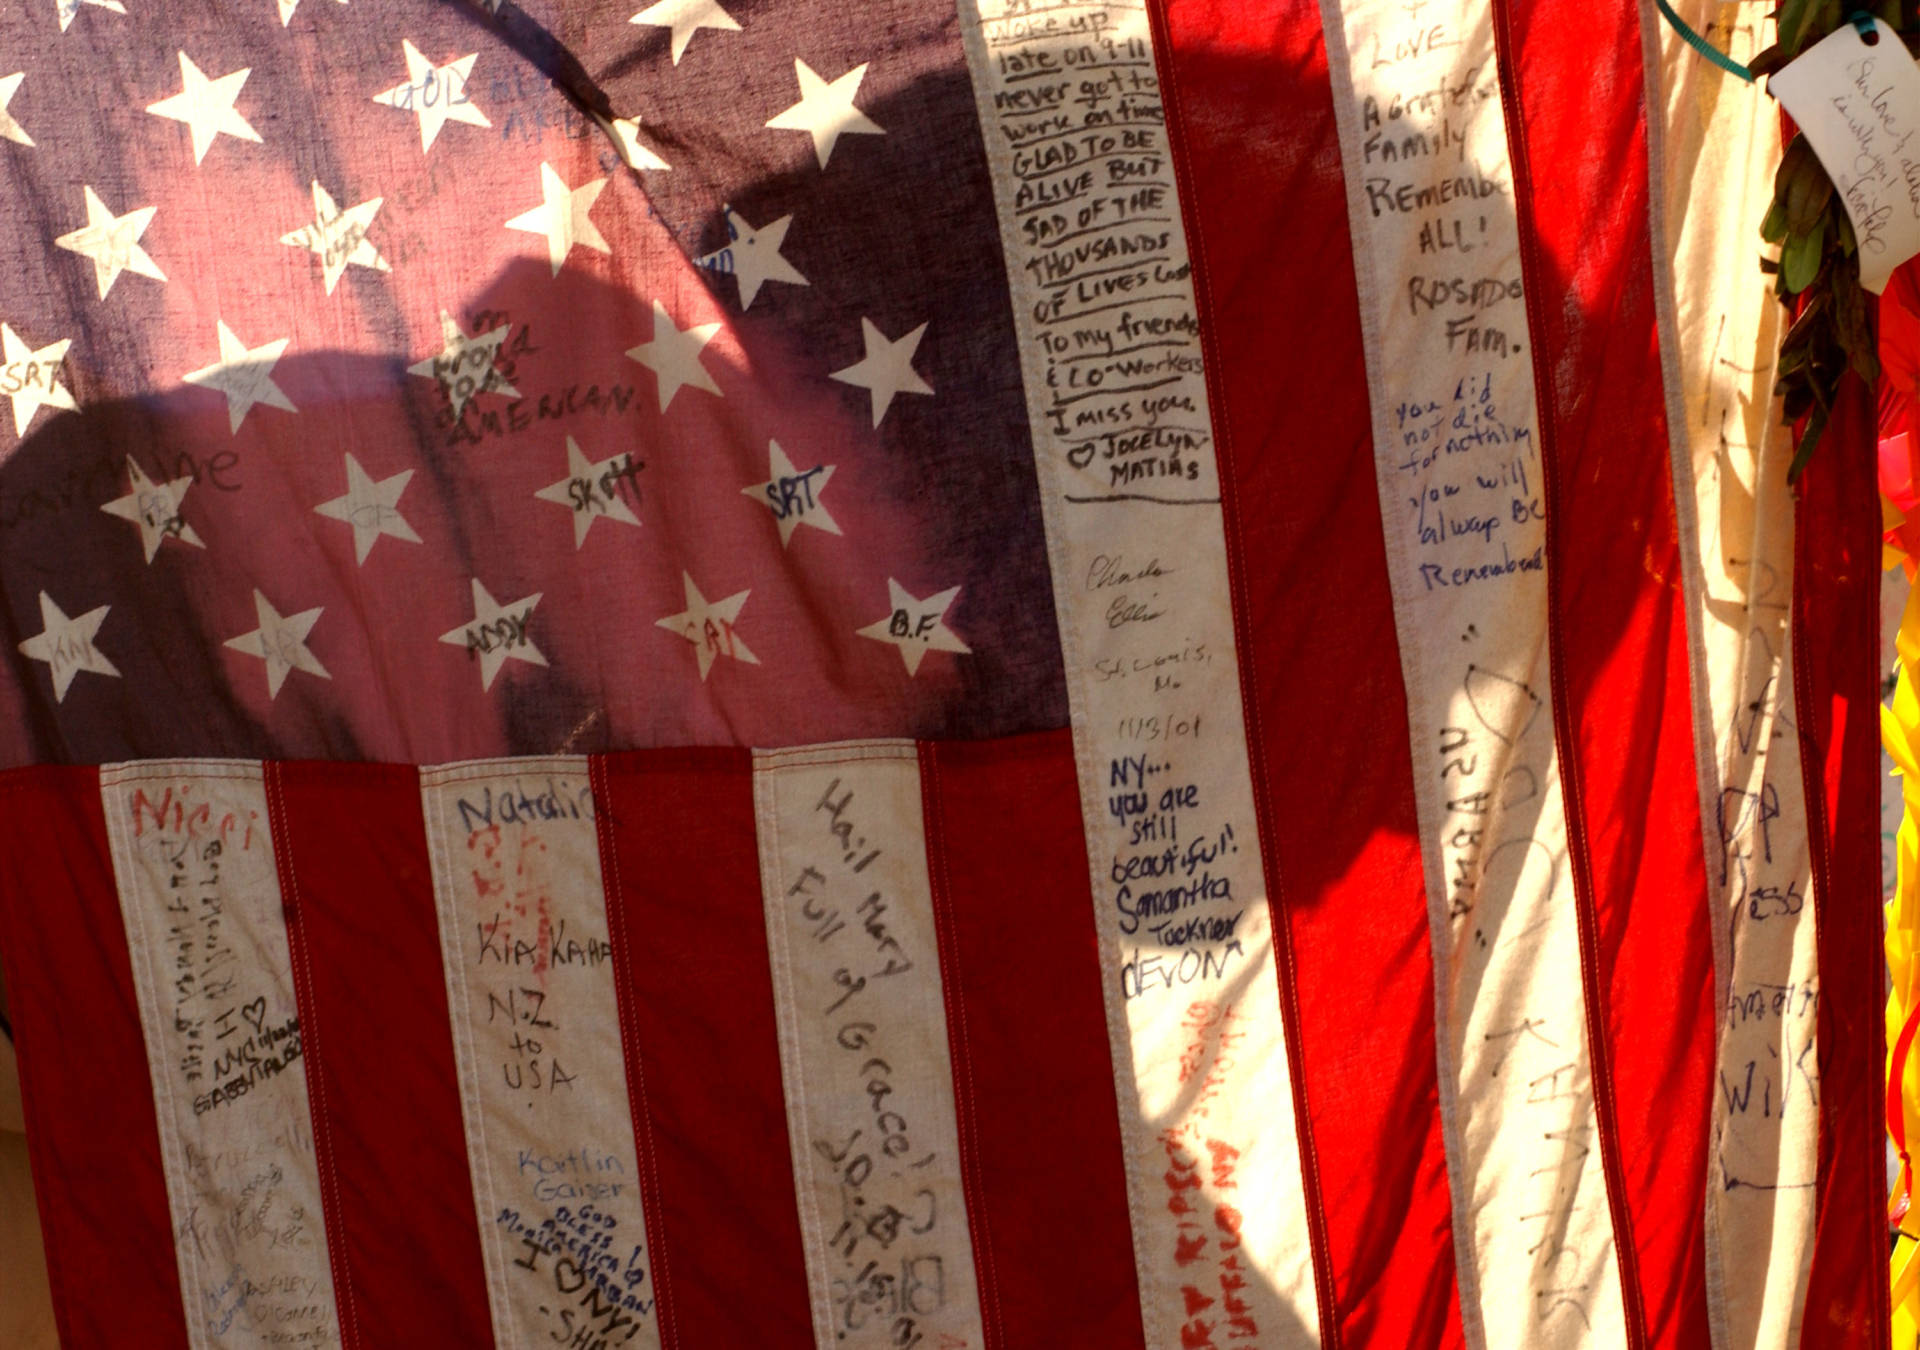 A man's shadow is cast on a flag in 2001 at a 9/11 victims' memorial near the site of the World Trade Center in New York City. Spencer Platt/Getty Images